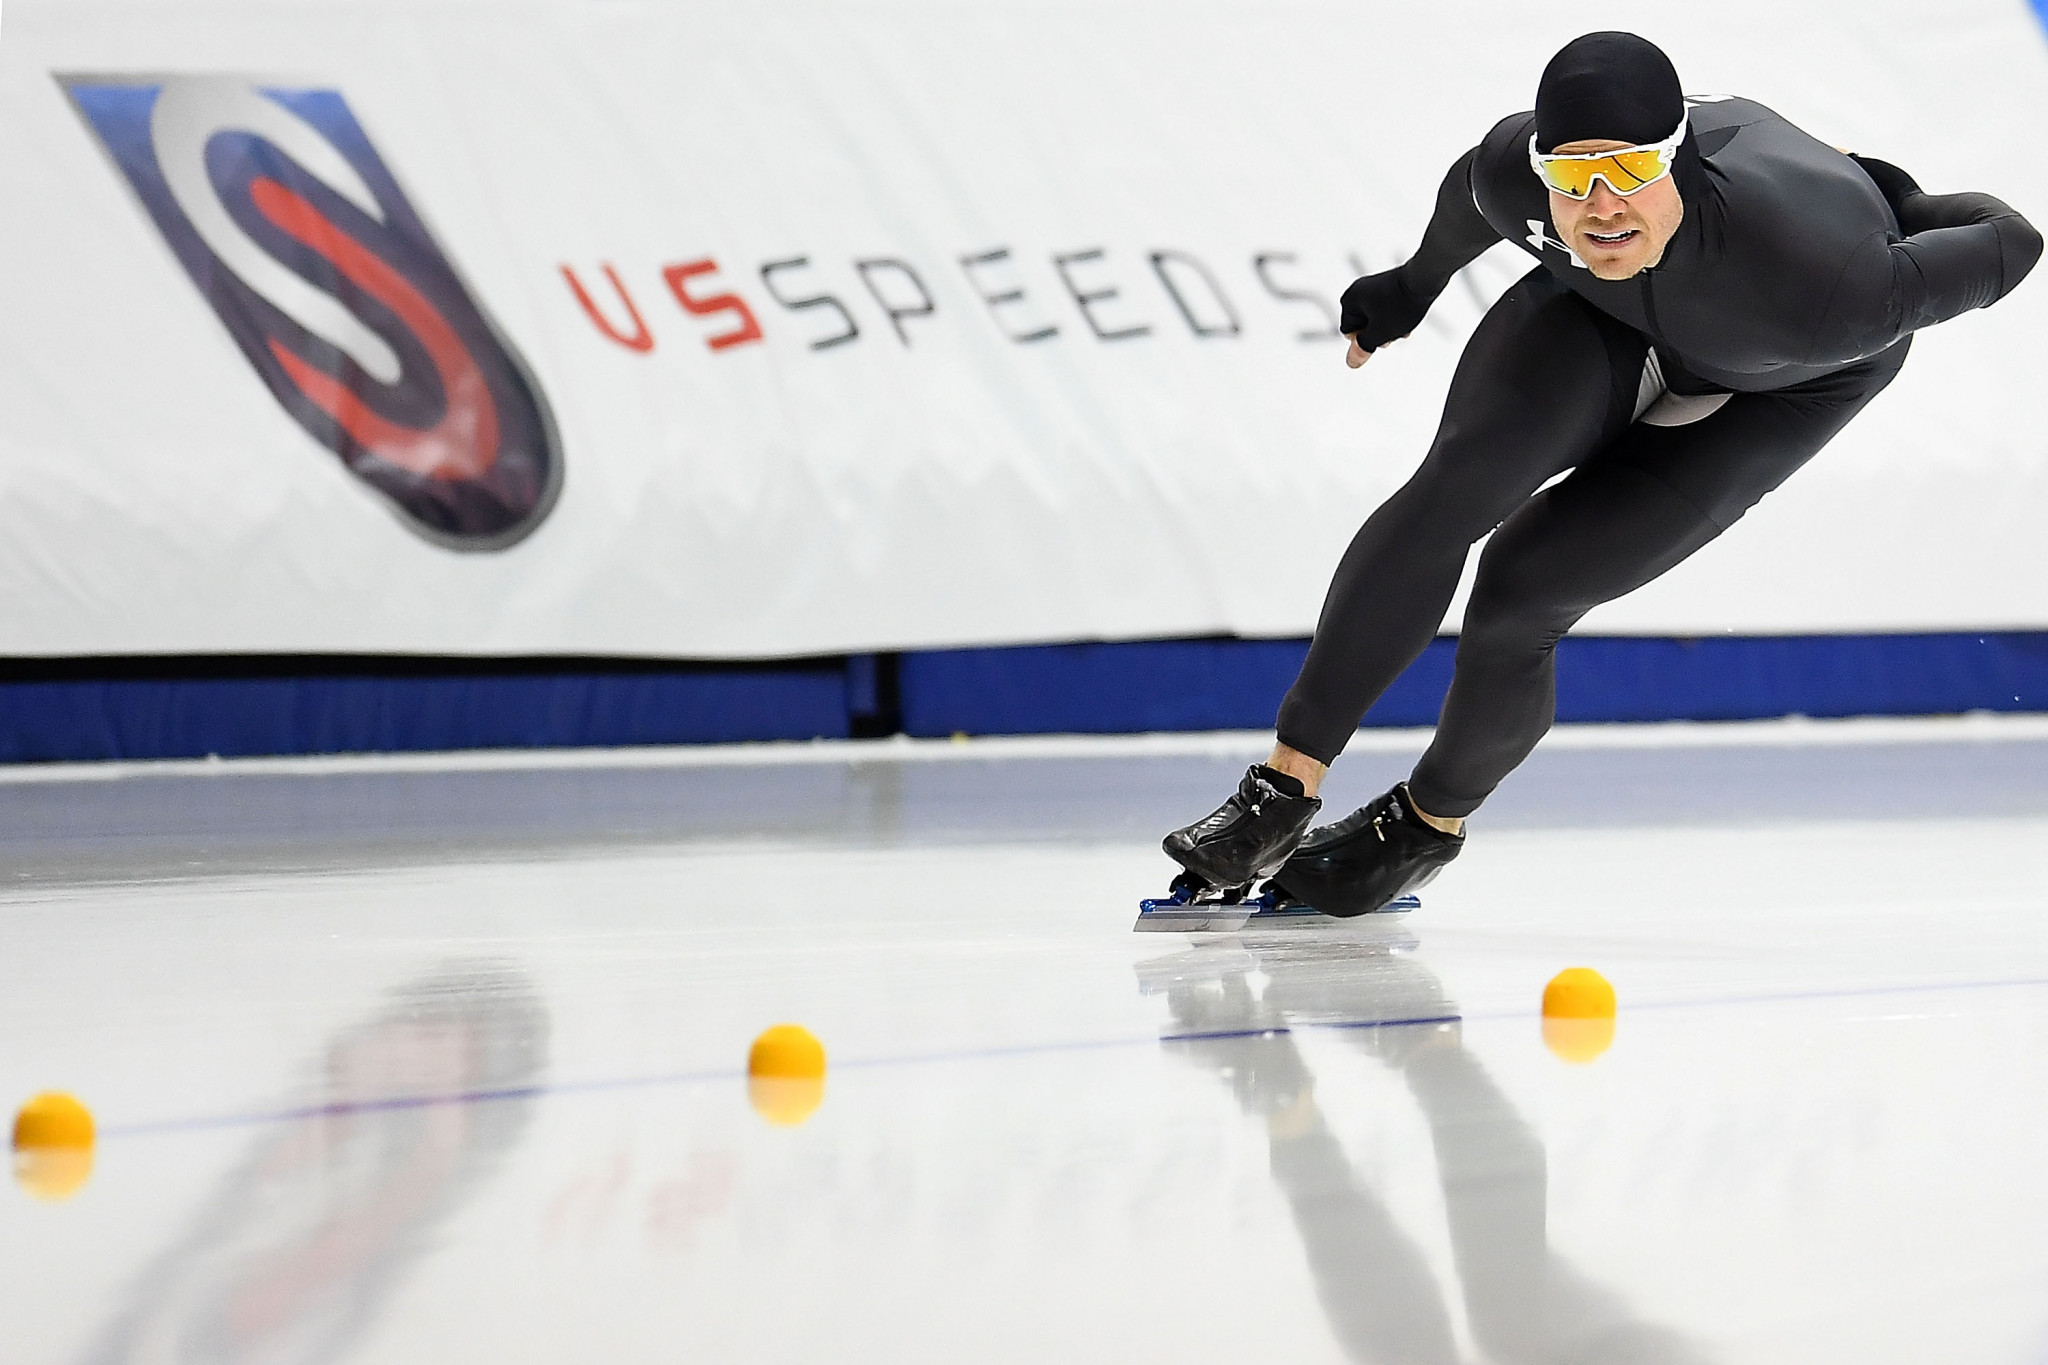 Five added to United States speed skating squad for Pyeongchang 2018